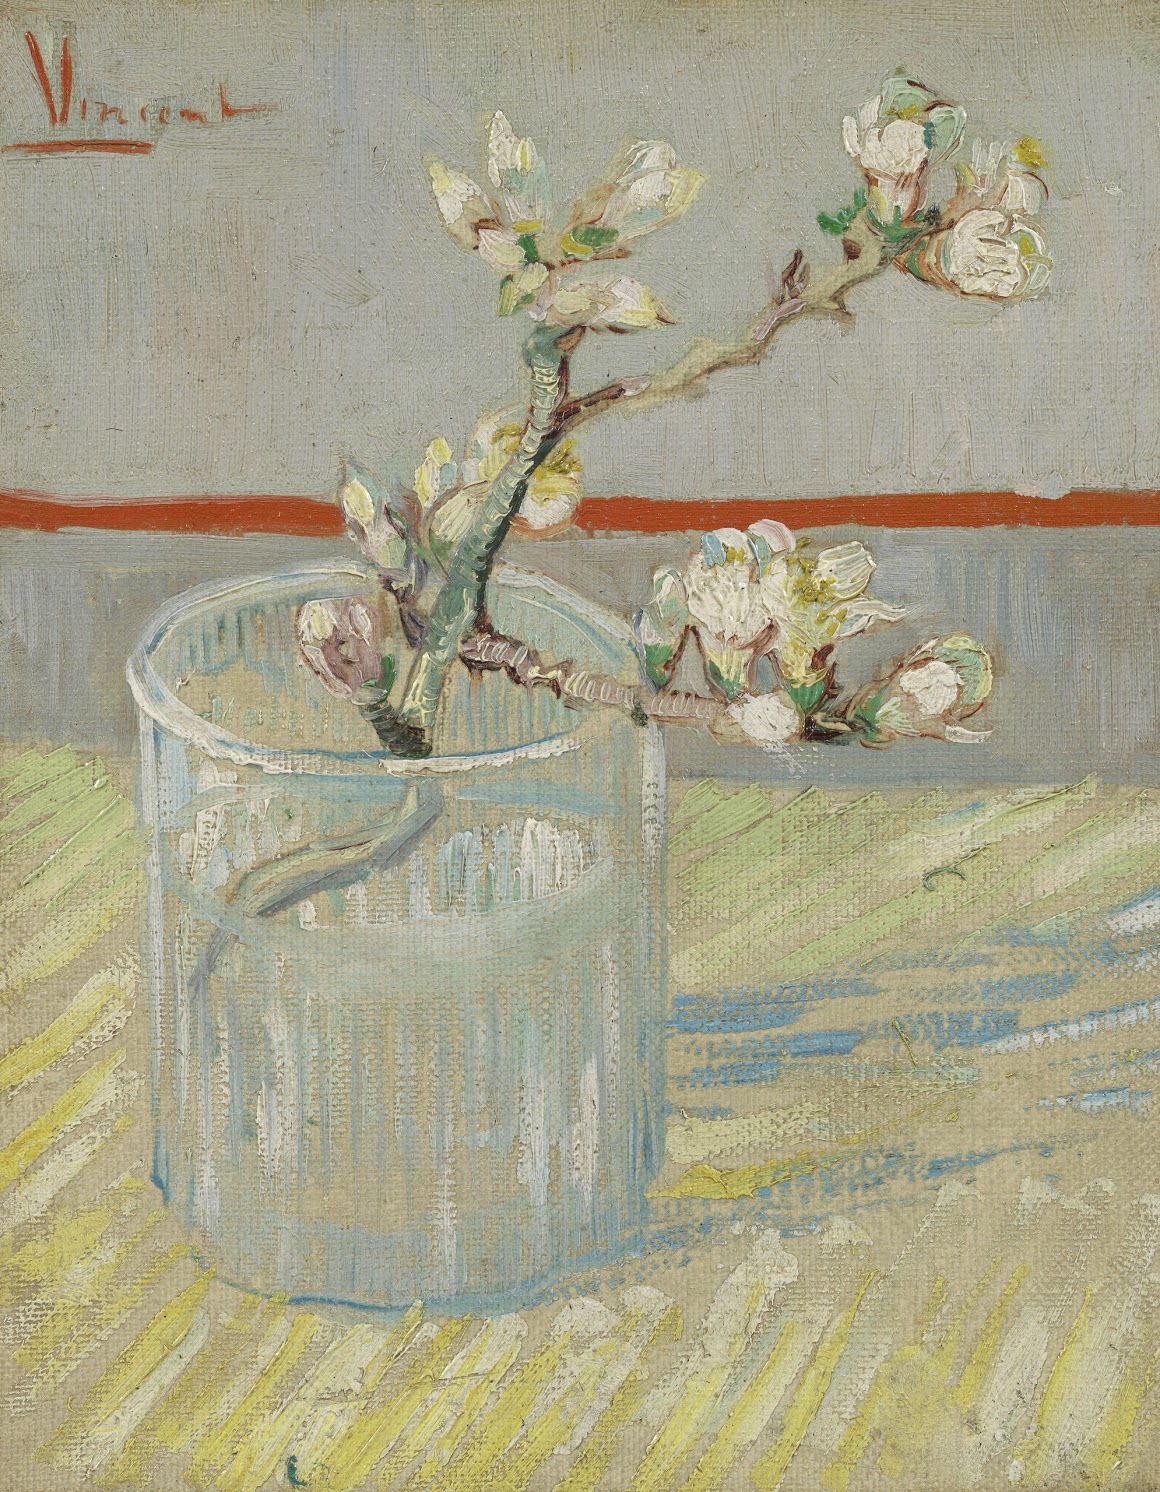 "FLOWERING ALMOND TWIG IN A GLASS"